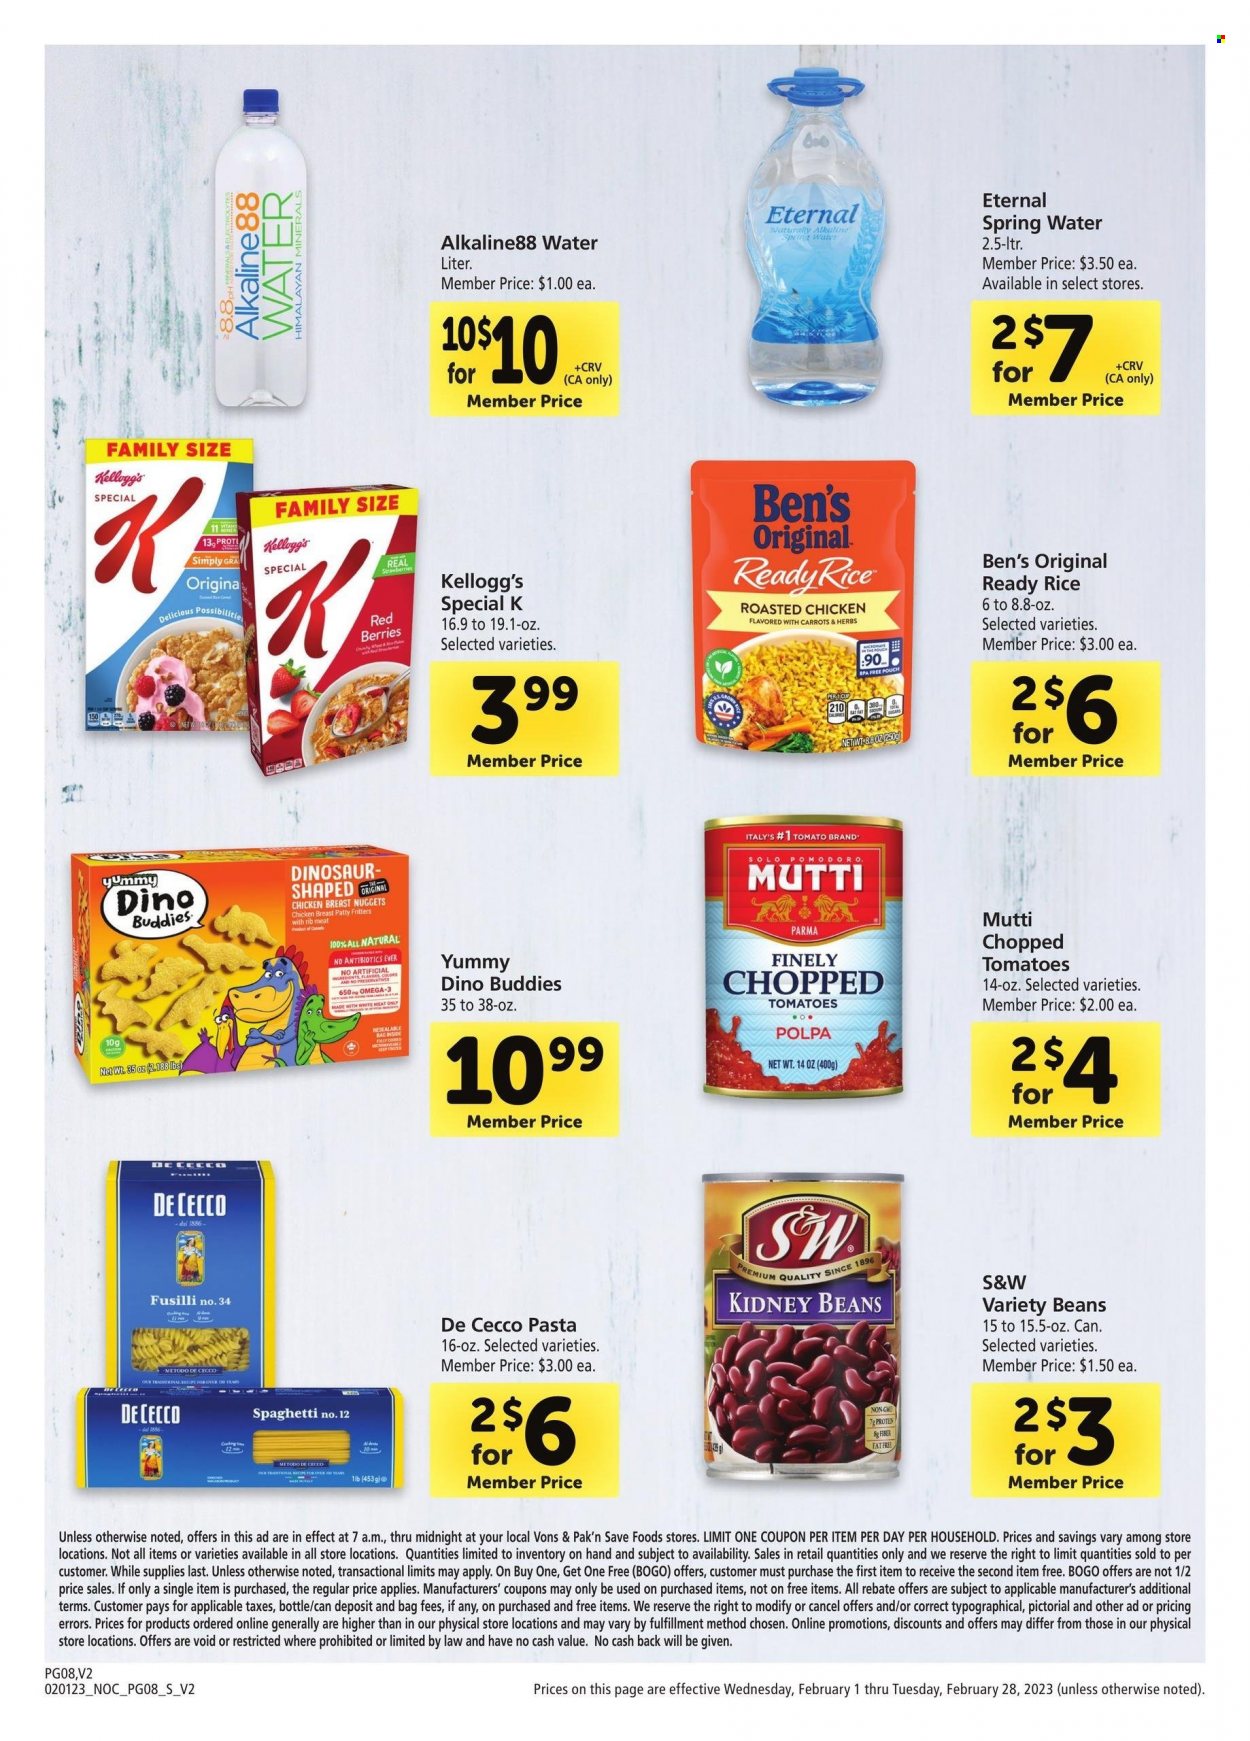 thumbnail - Vons Flyer - 02/01/2023 - 02/28/2023 - Sales products - beans, tomatoes, spaghetti, chicken roast, nuggets, pasta, chicken nuggets, Yummy Dino Buddies, Kellogg's, kidney beans, chopped tomatoes, rice, spring water, dinosaur. Page 8.